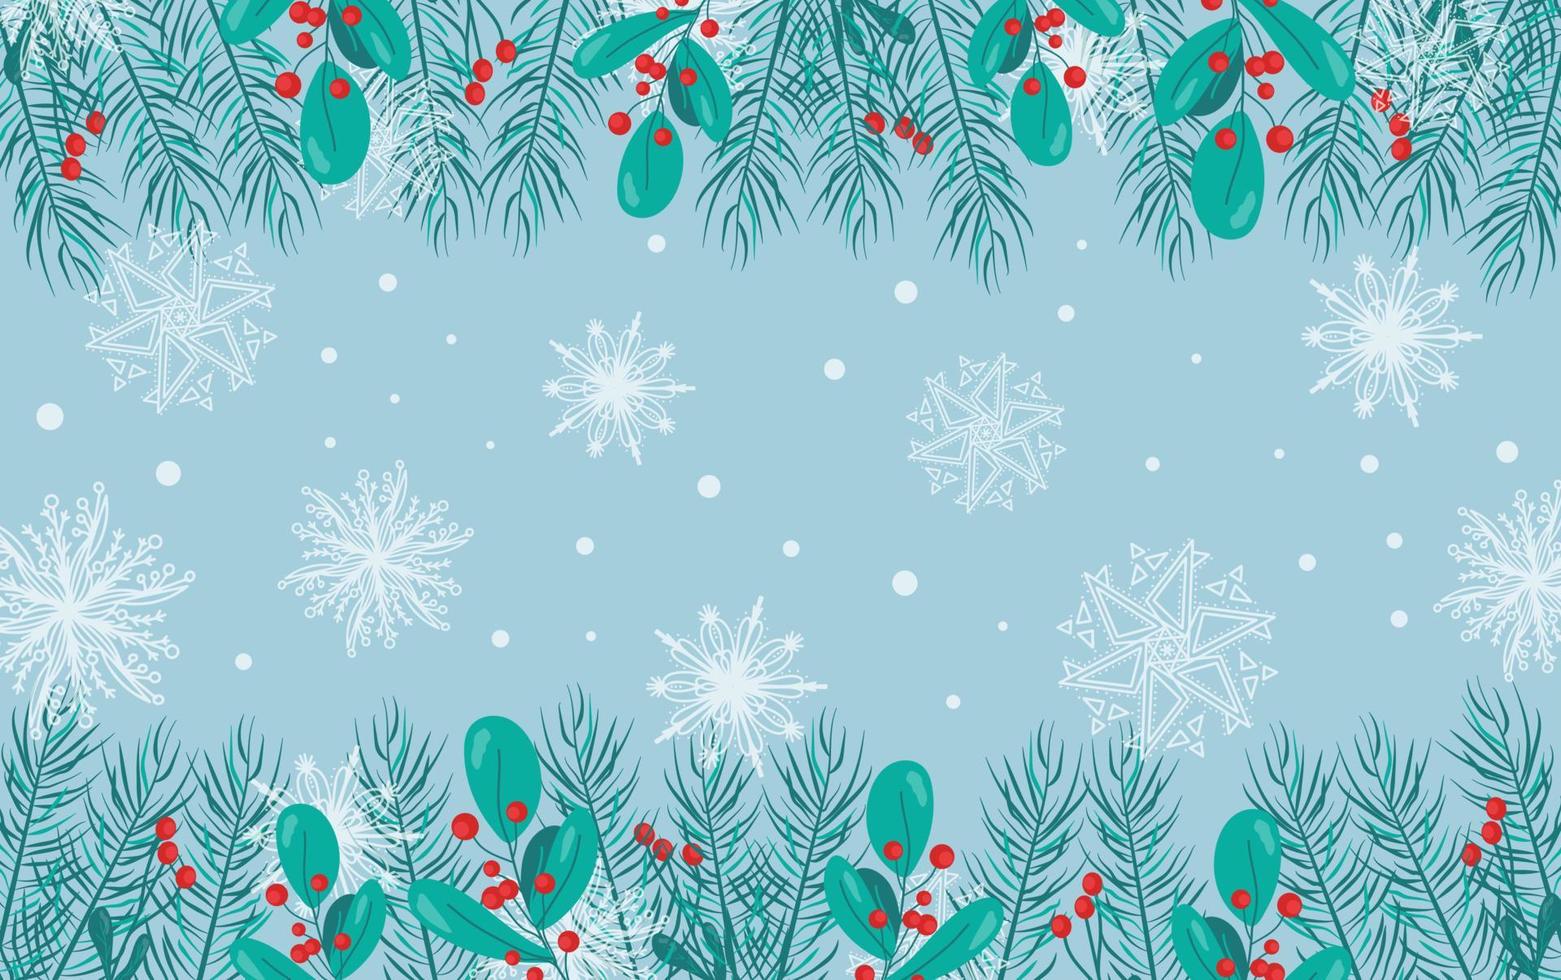 Beautiful background with white snowflakes and berry branches for winter design. Collection of Christmas New Year elements. Frozen silhouettes of crystal snowflakes. Modern design. Holiday wallpaper. vector